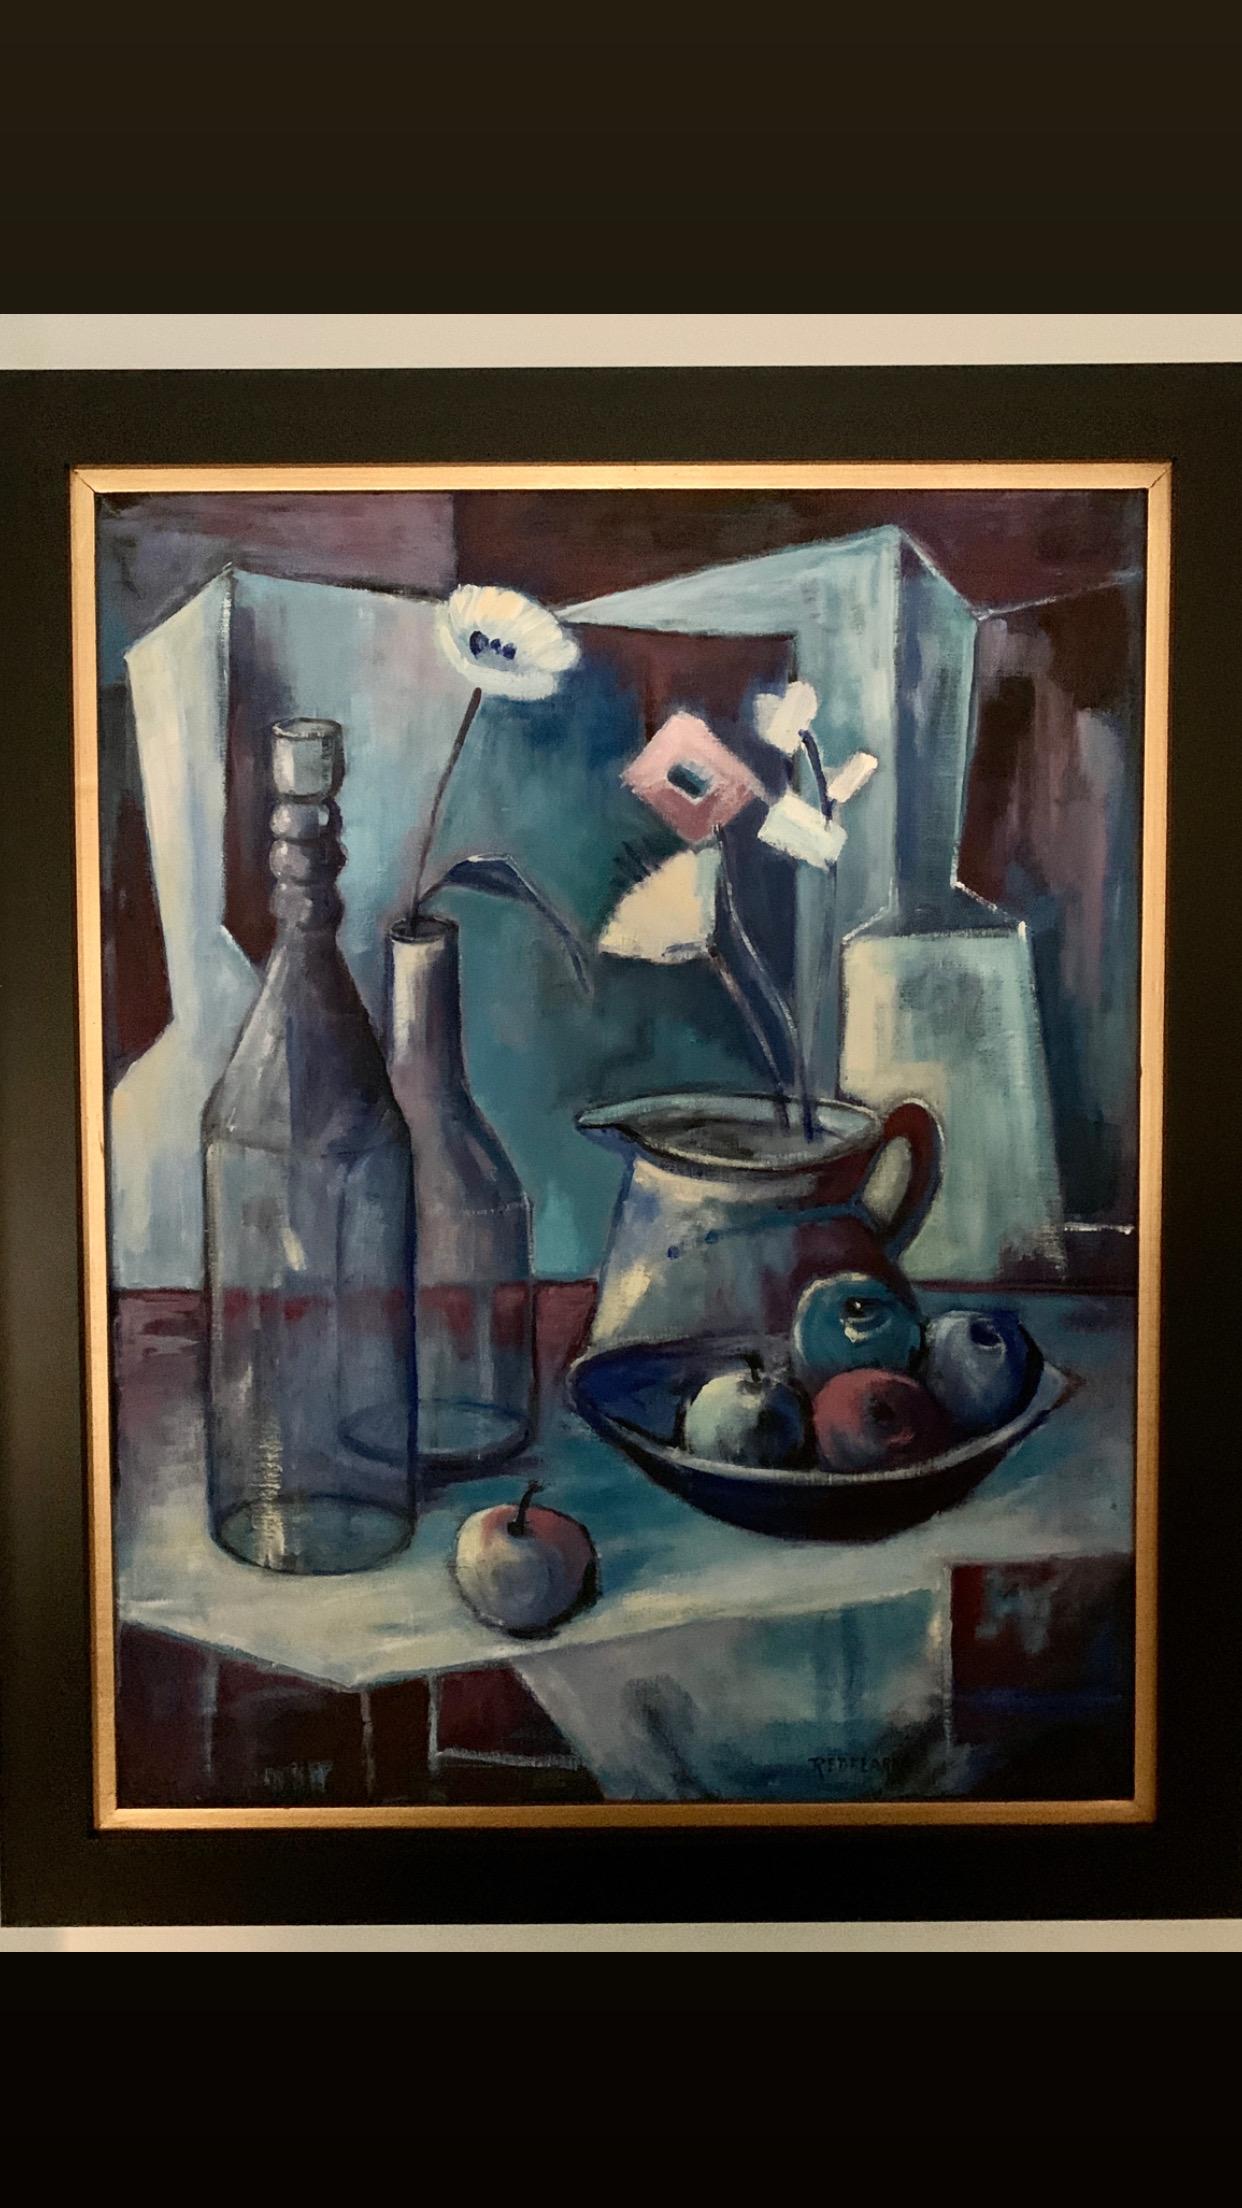 In the style of cubism, a still life with a stunning blue palette depicting fruit, bottles and flowers. The acrylic on canvas painting compliments many spaces and especially those with a blue or clean architectural lines...

Measures: Image area is